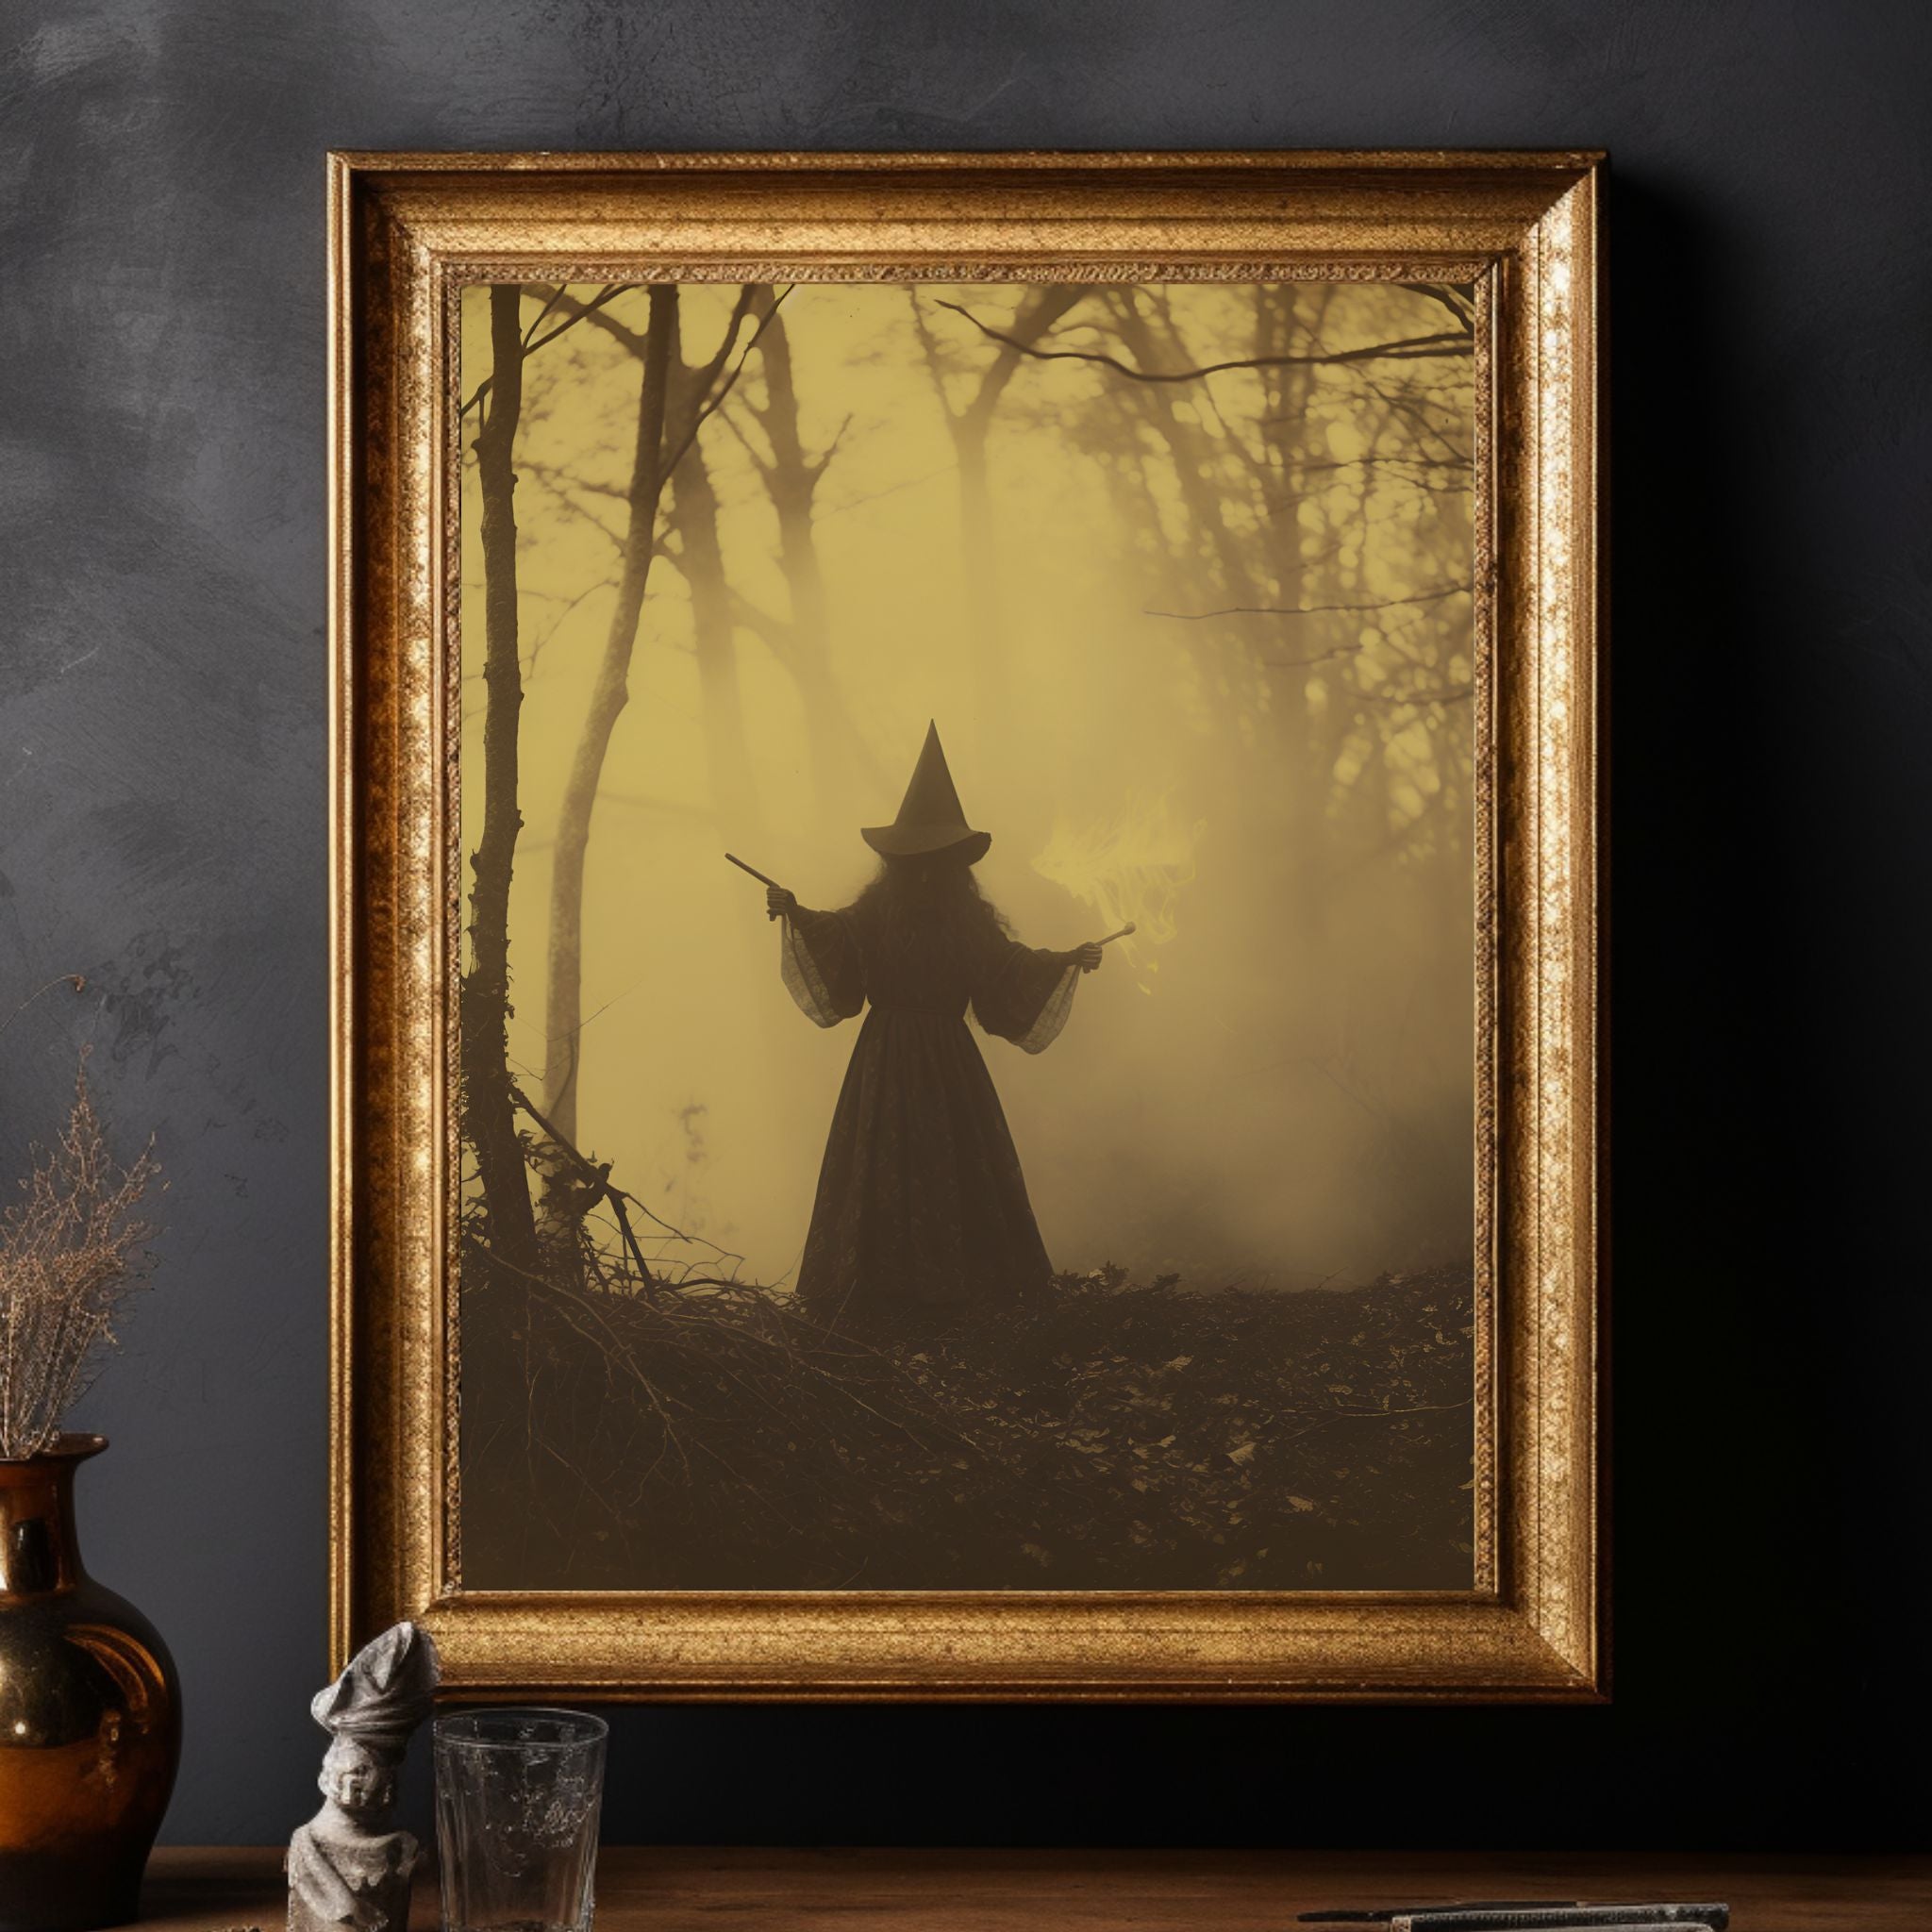 Magical Witchcraft Vintage Photography Wall Art: Occult Poster